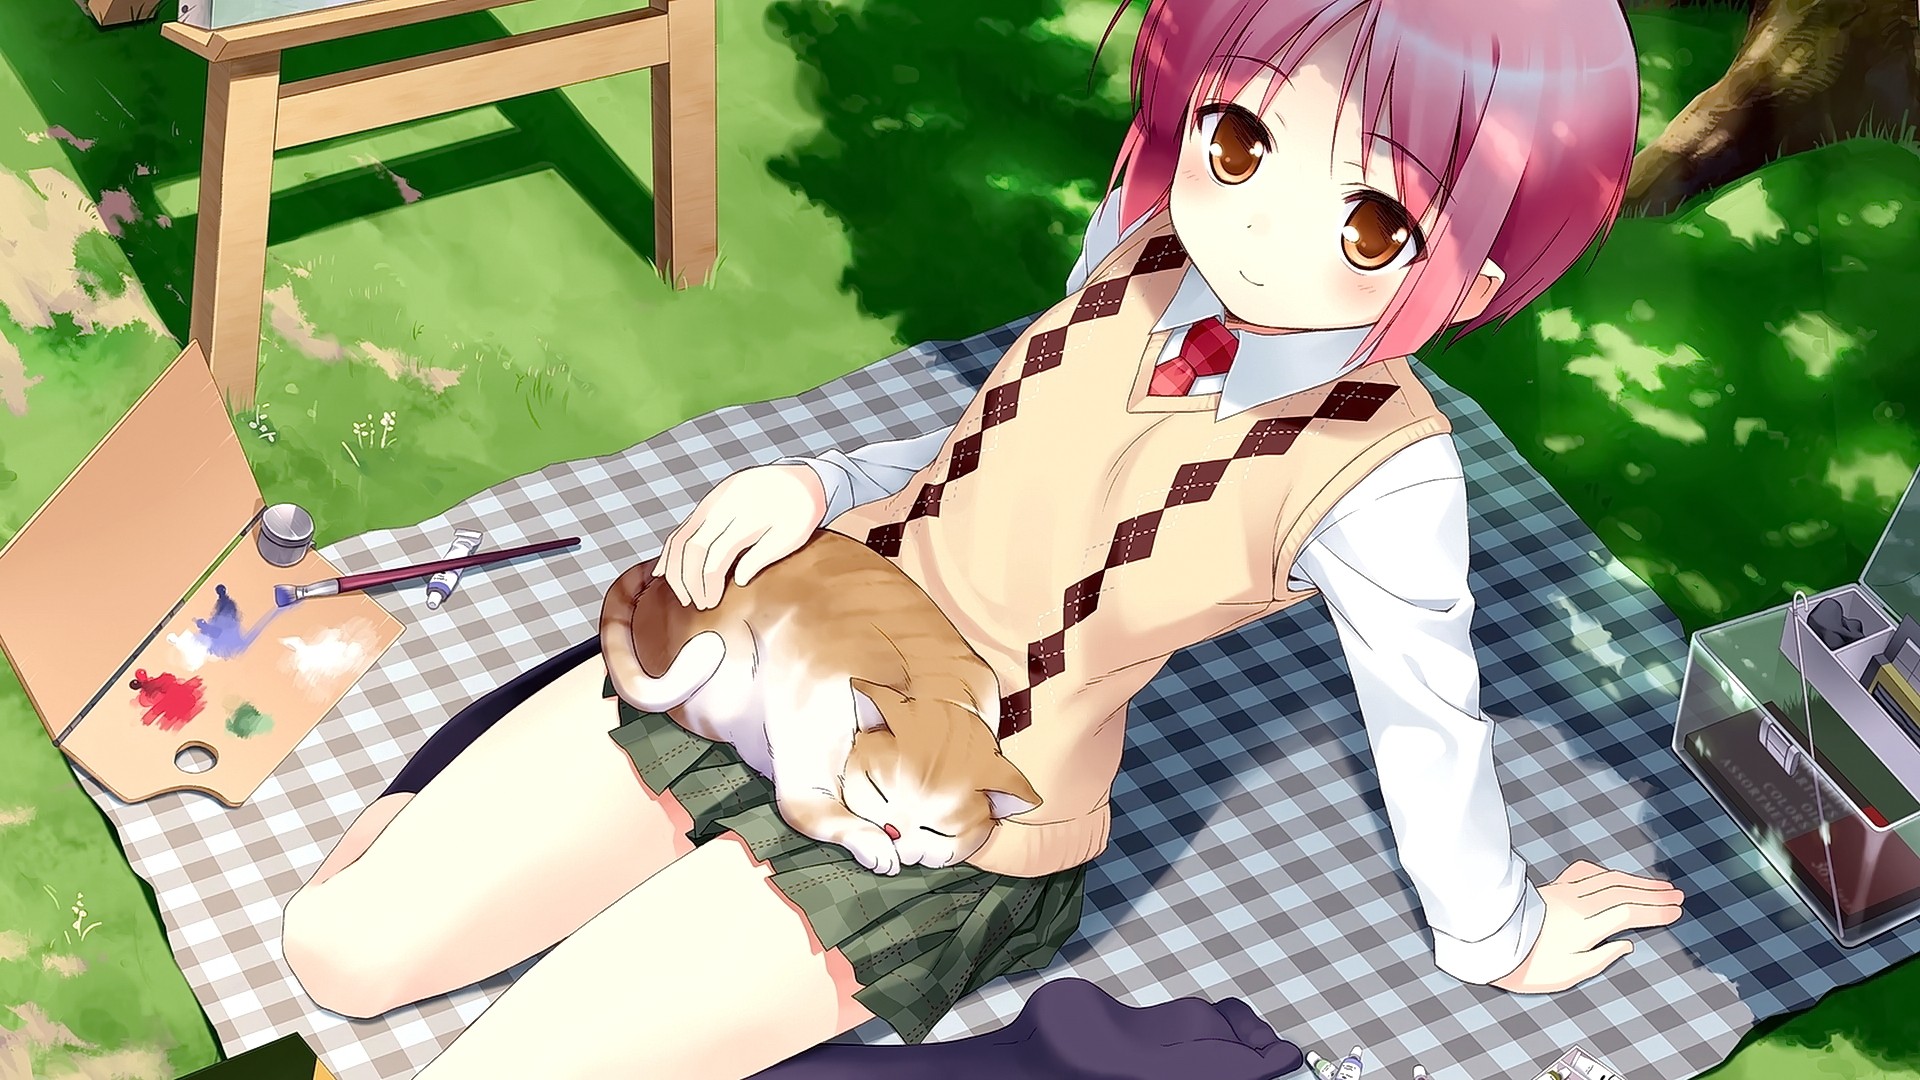 Anime 1920x1080 anime anime girls pink hair animals cats smiling looking at viewer tie mammals paint brushes skirt green skirt women outdoors shoulder length hair